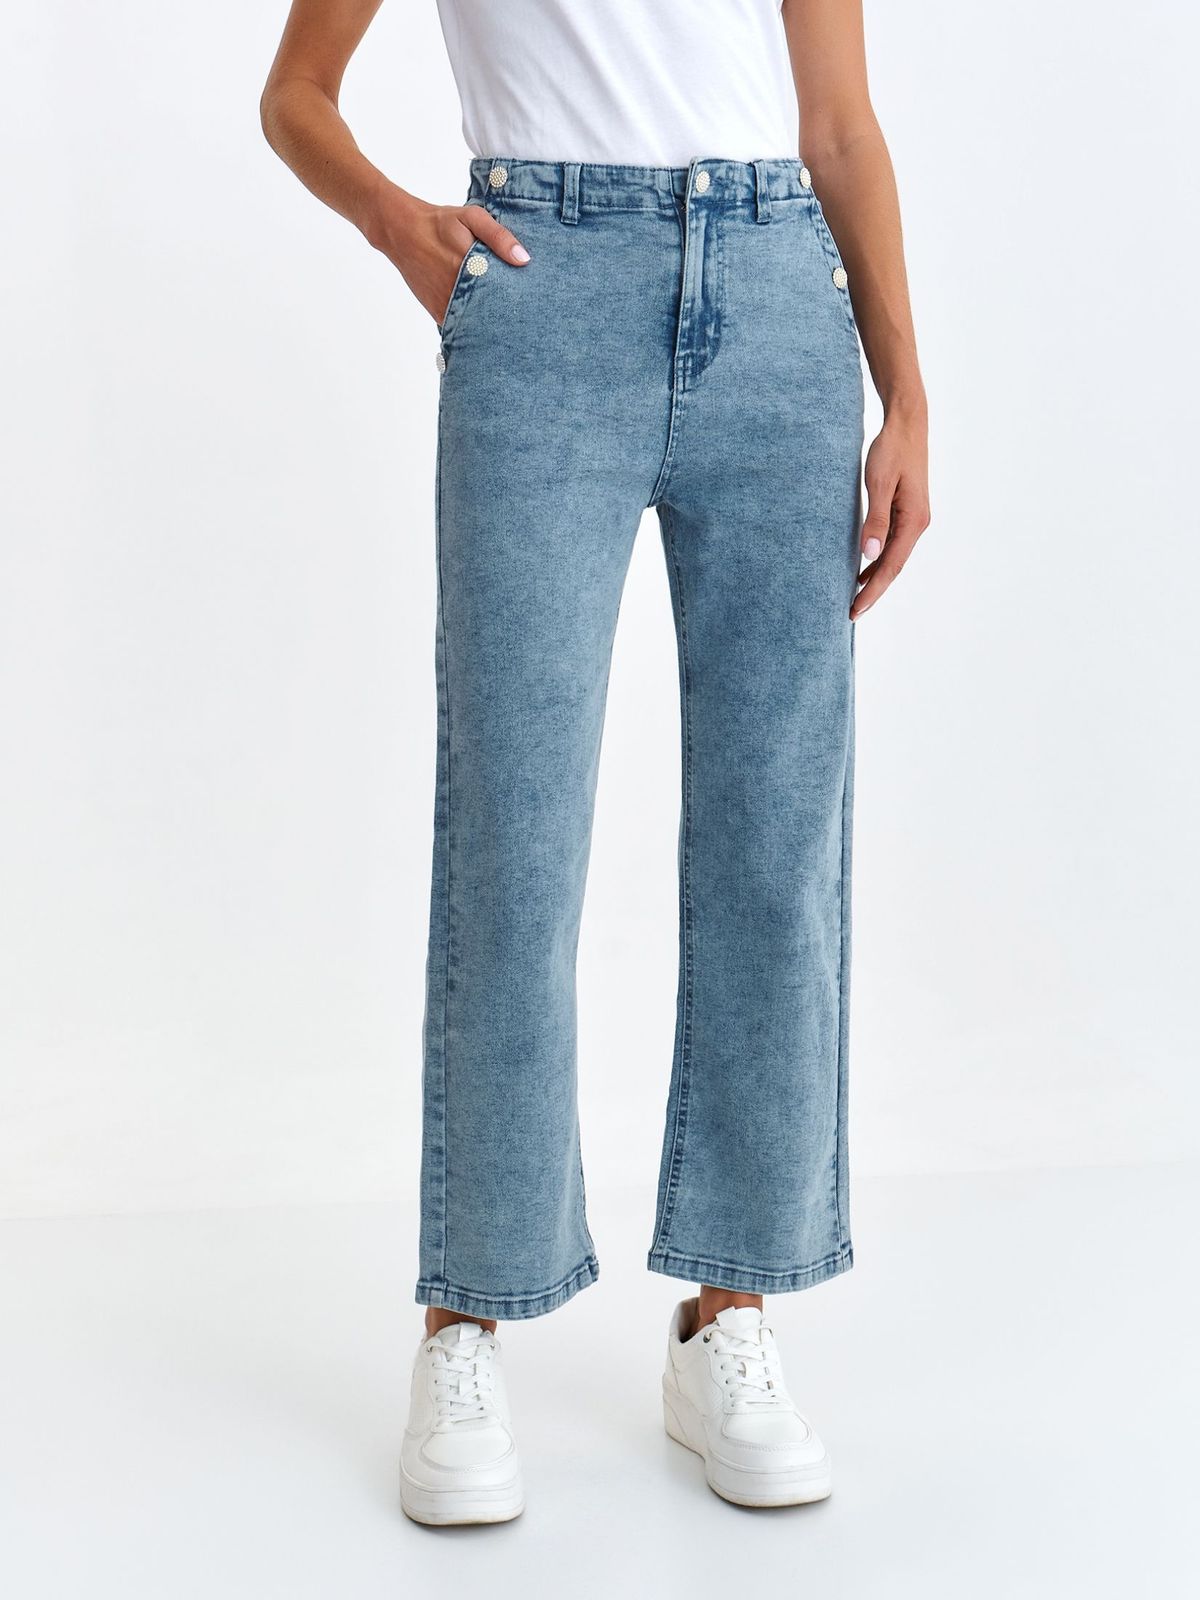 Blue jeans flared high waisted lateral pockets